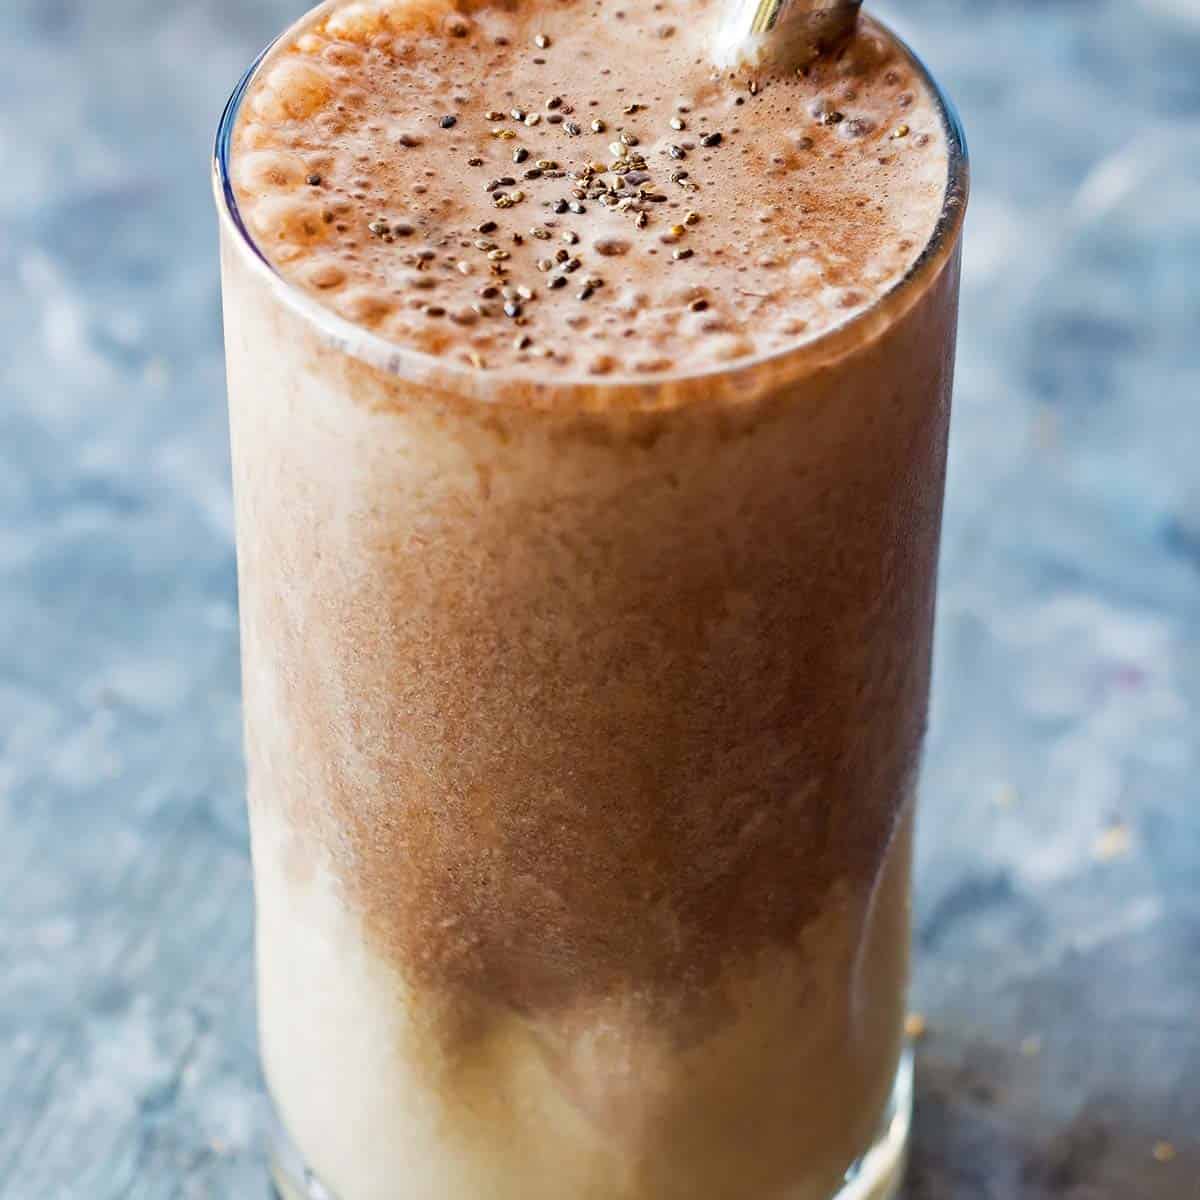 protein shake in glass with peanut butter layer on the bottom and chocolate layer on top